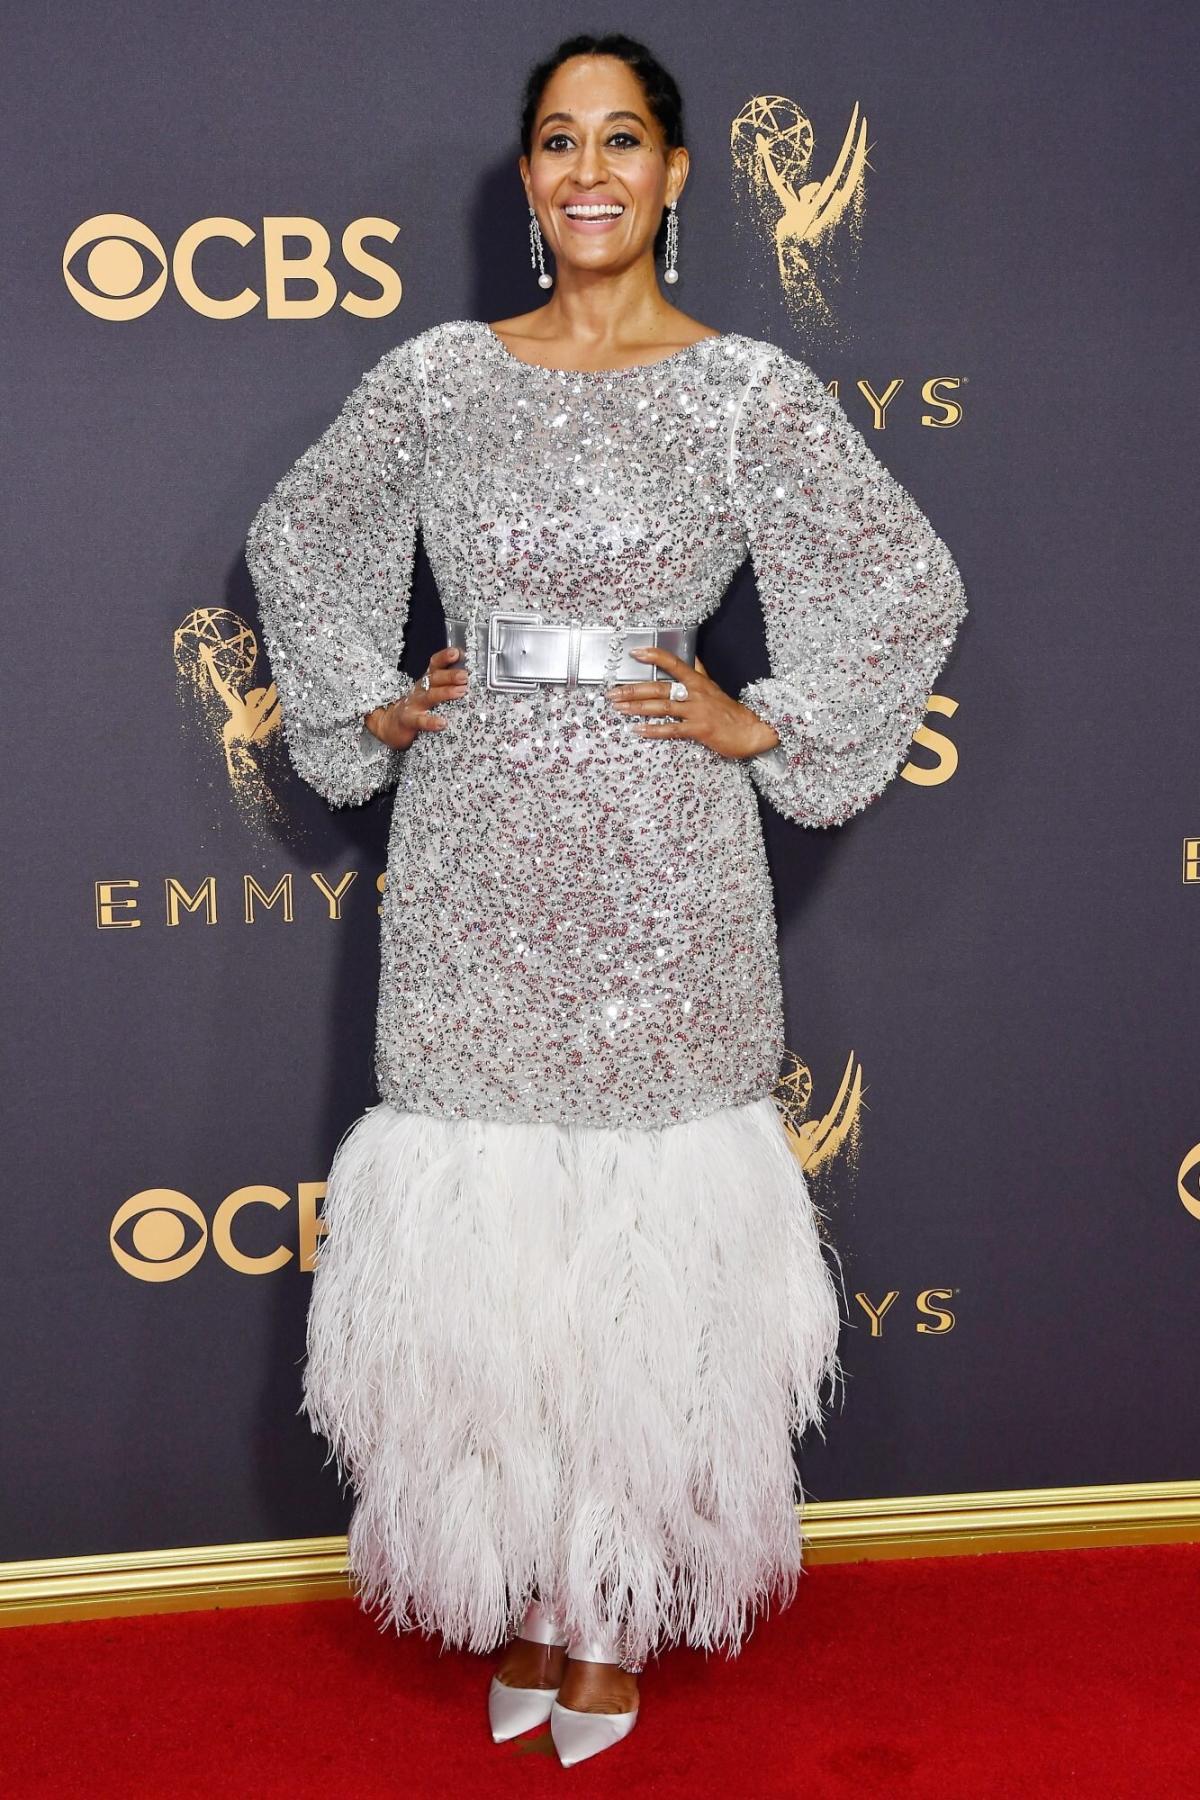 After an Emmys red carpet encased in Spanx, Lane Bryant's new